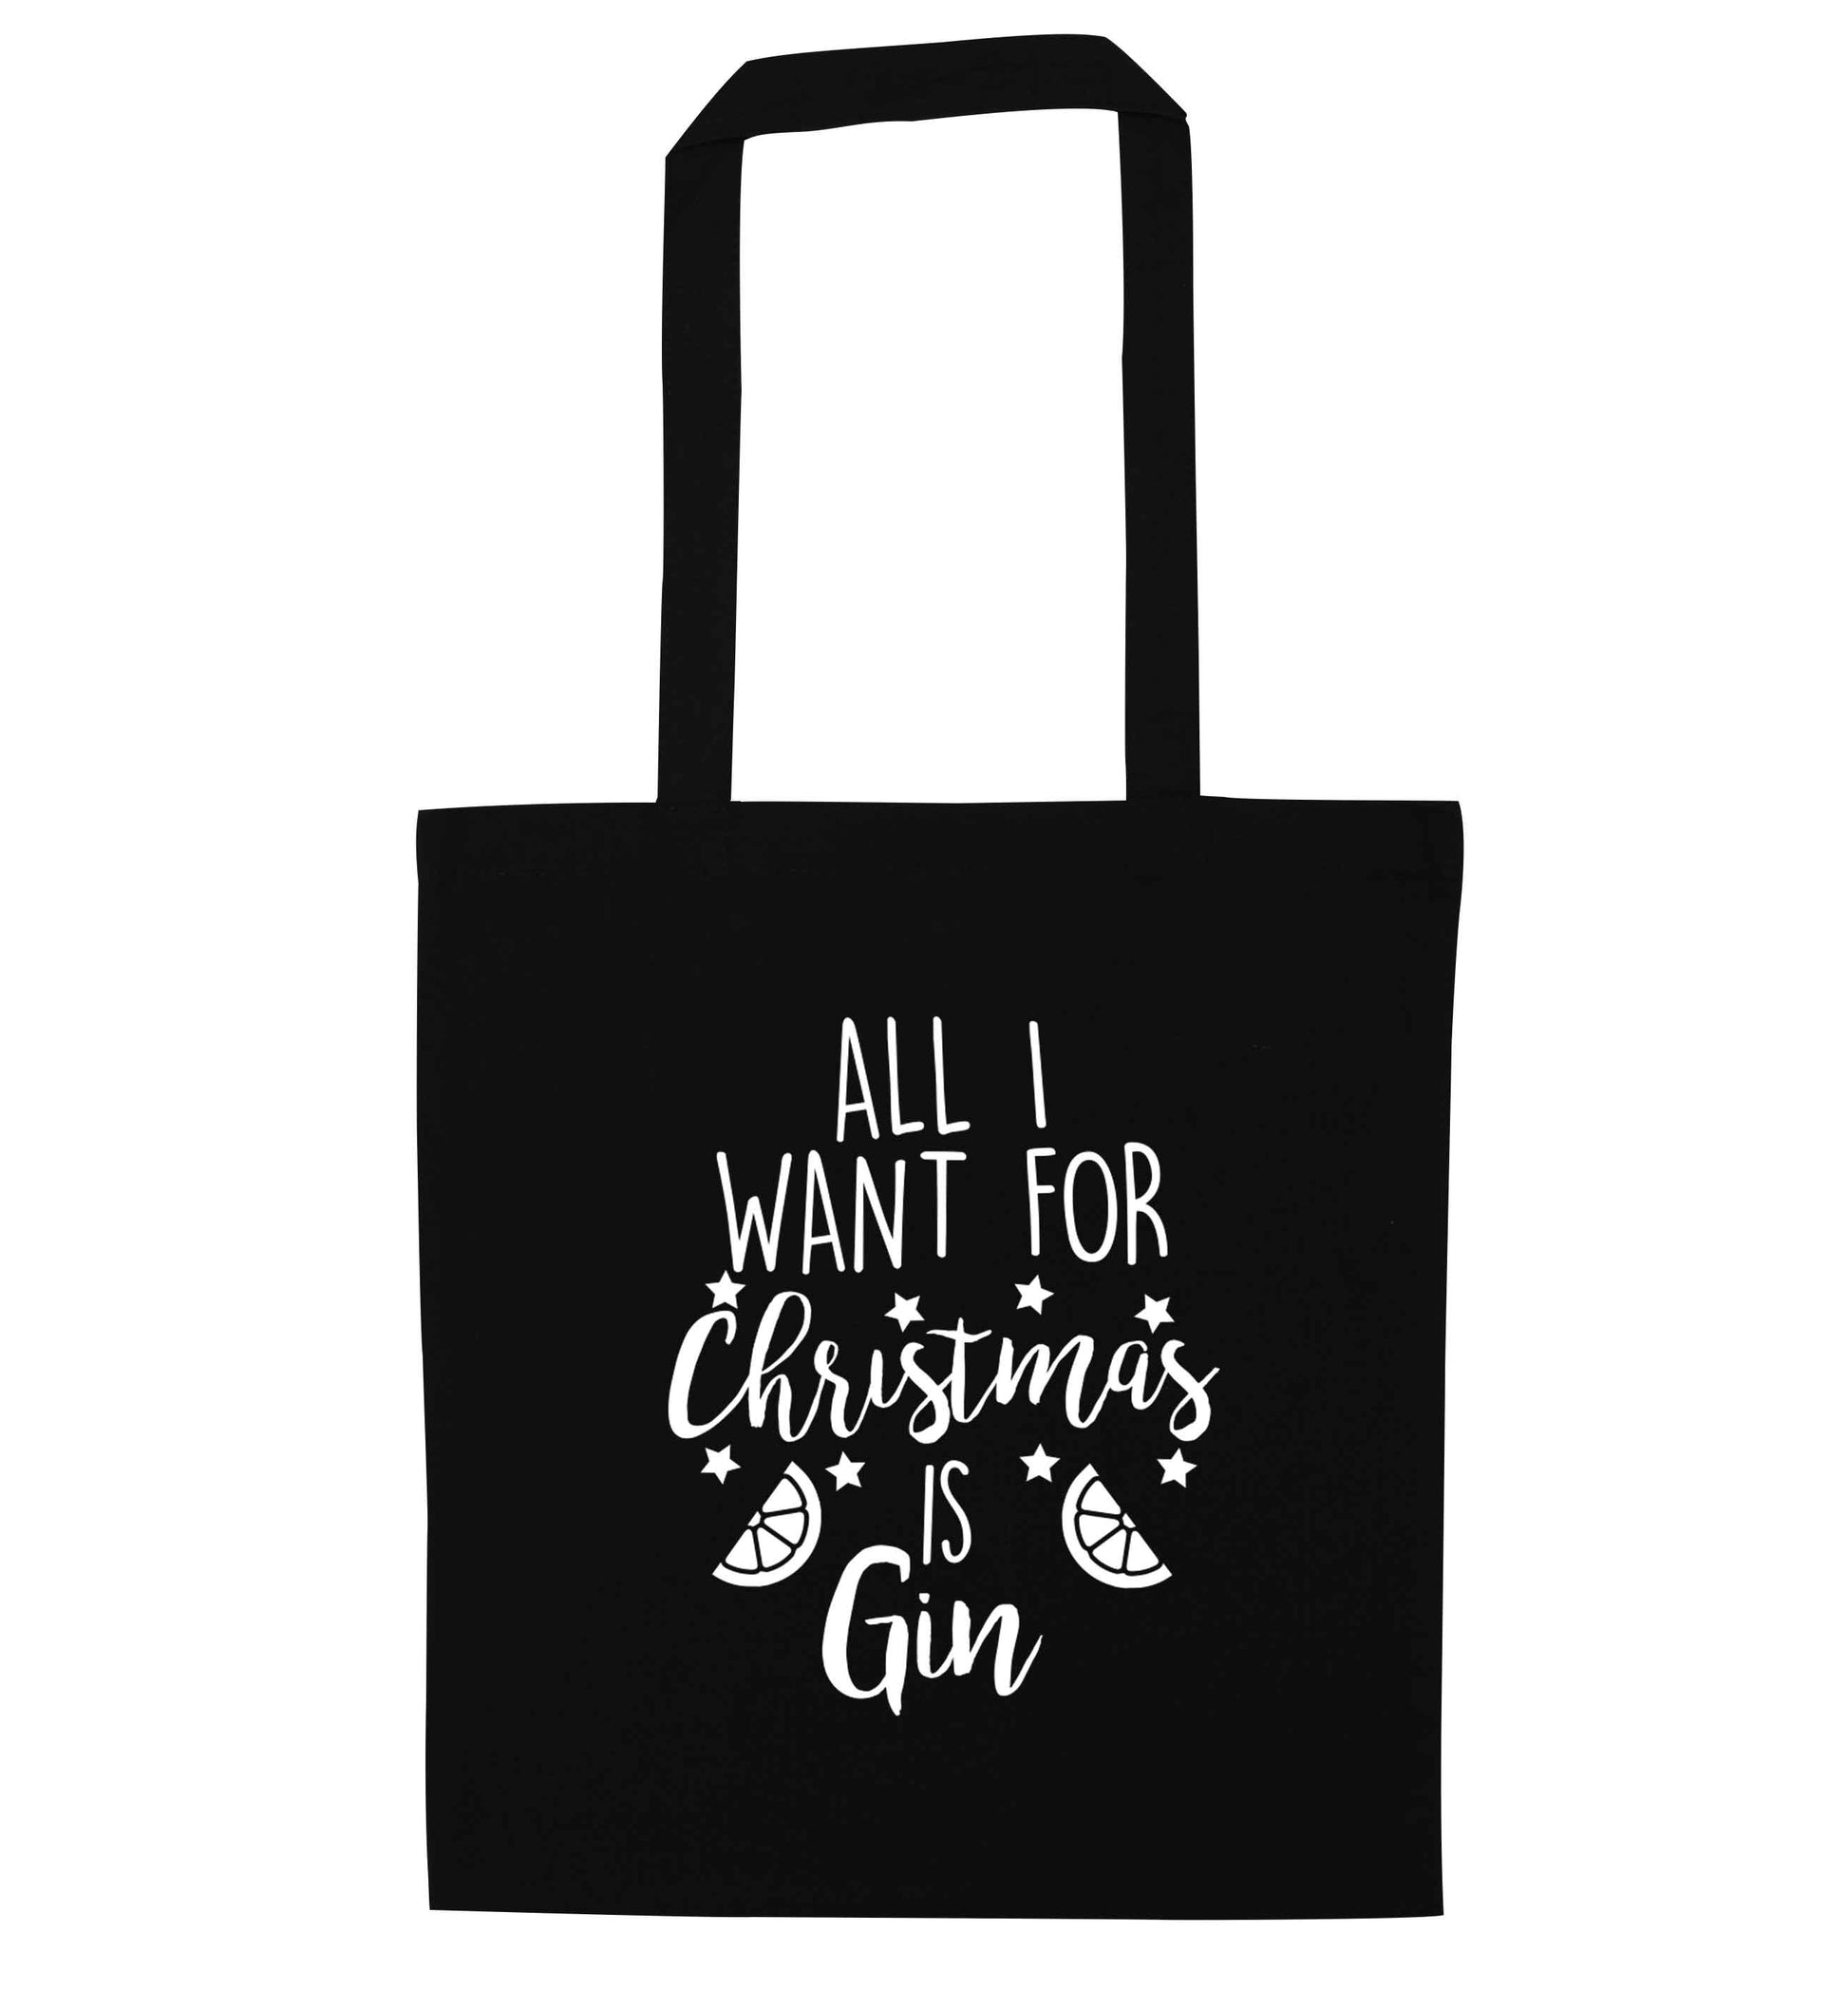 All I want for Christmas is gin black tote bag